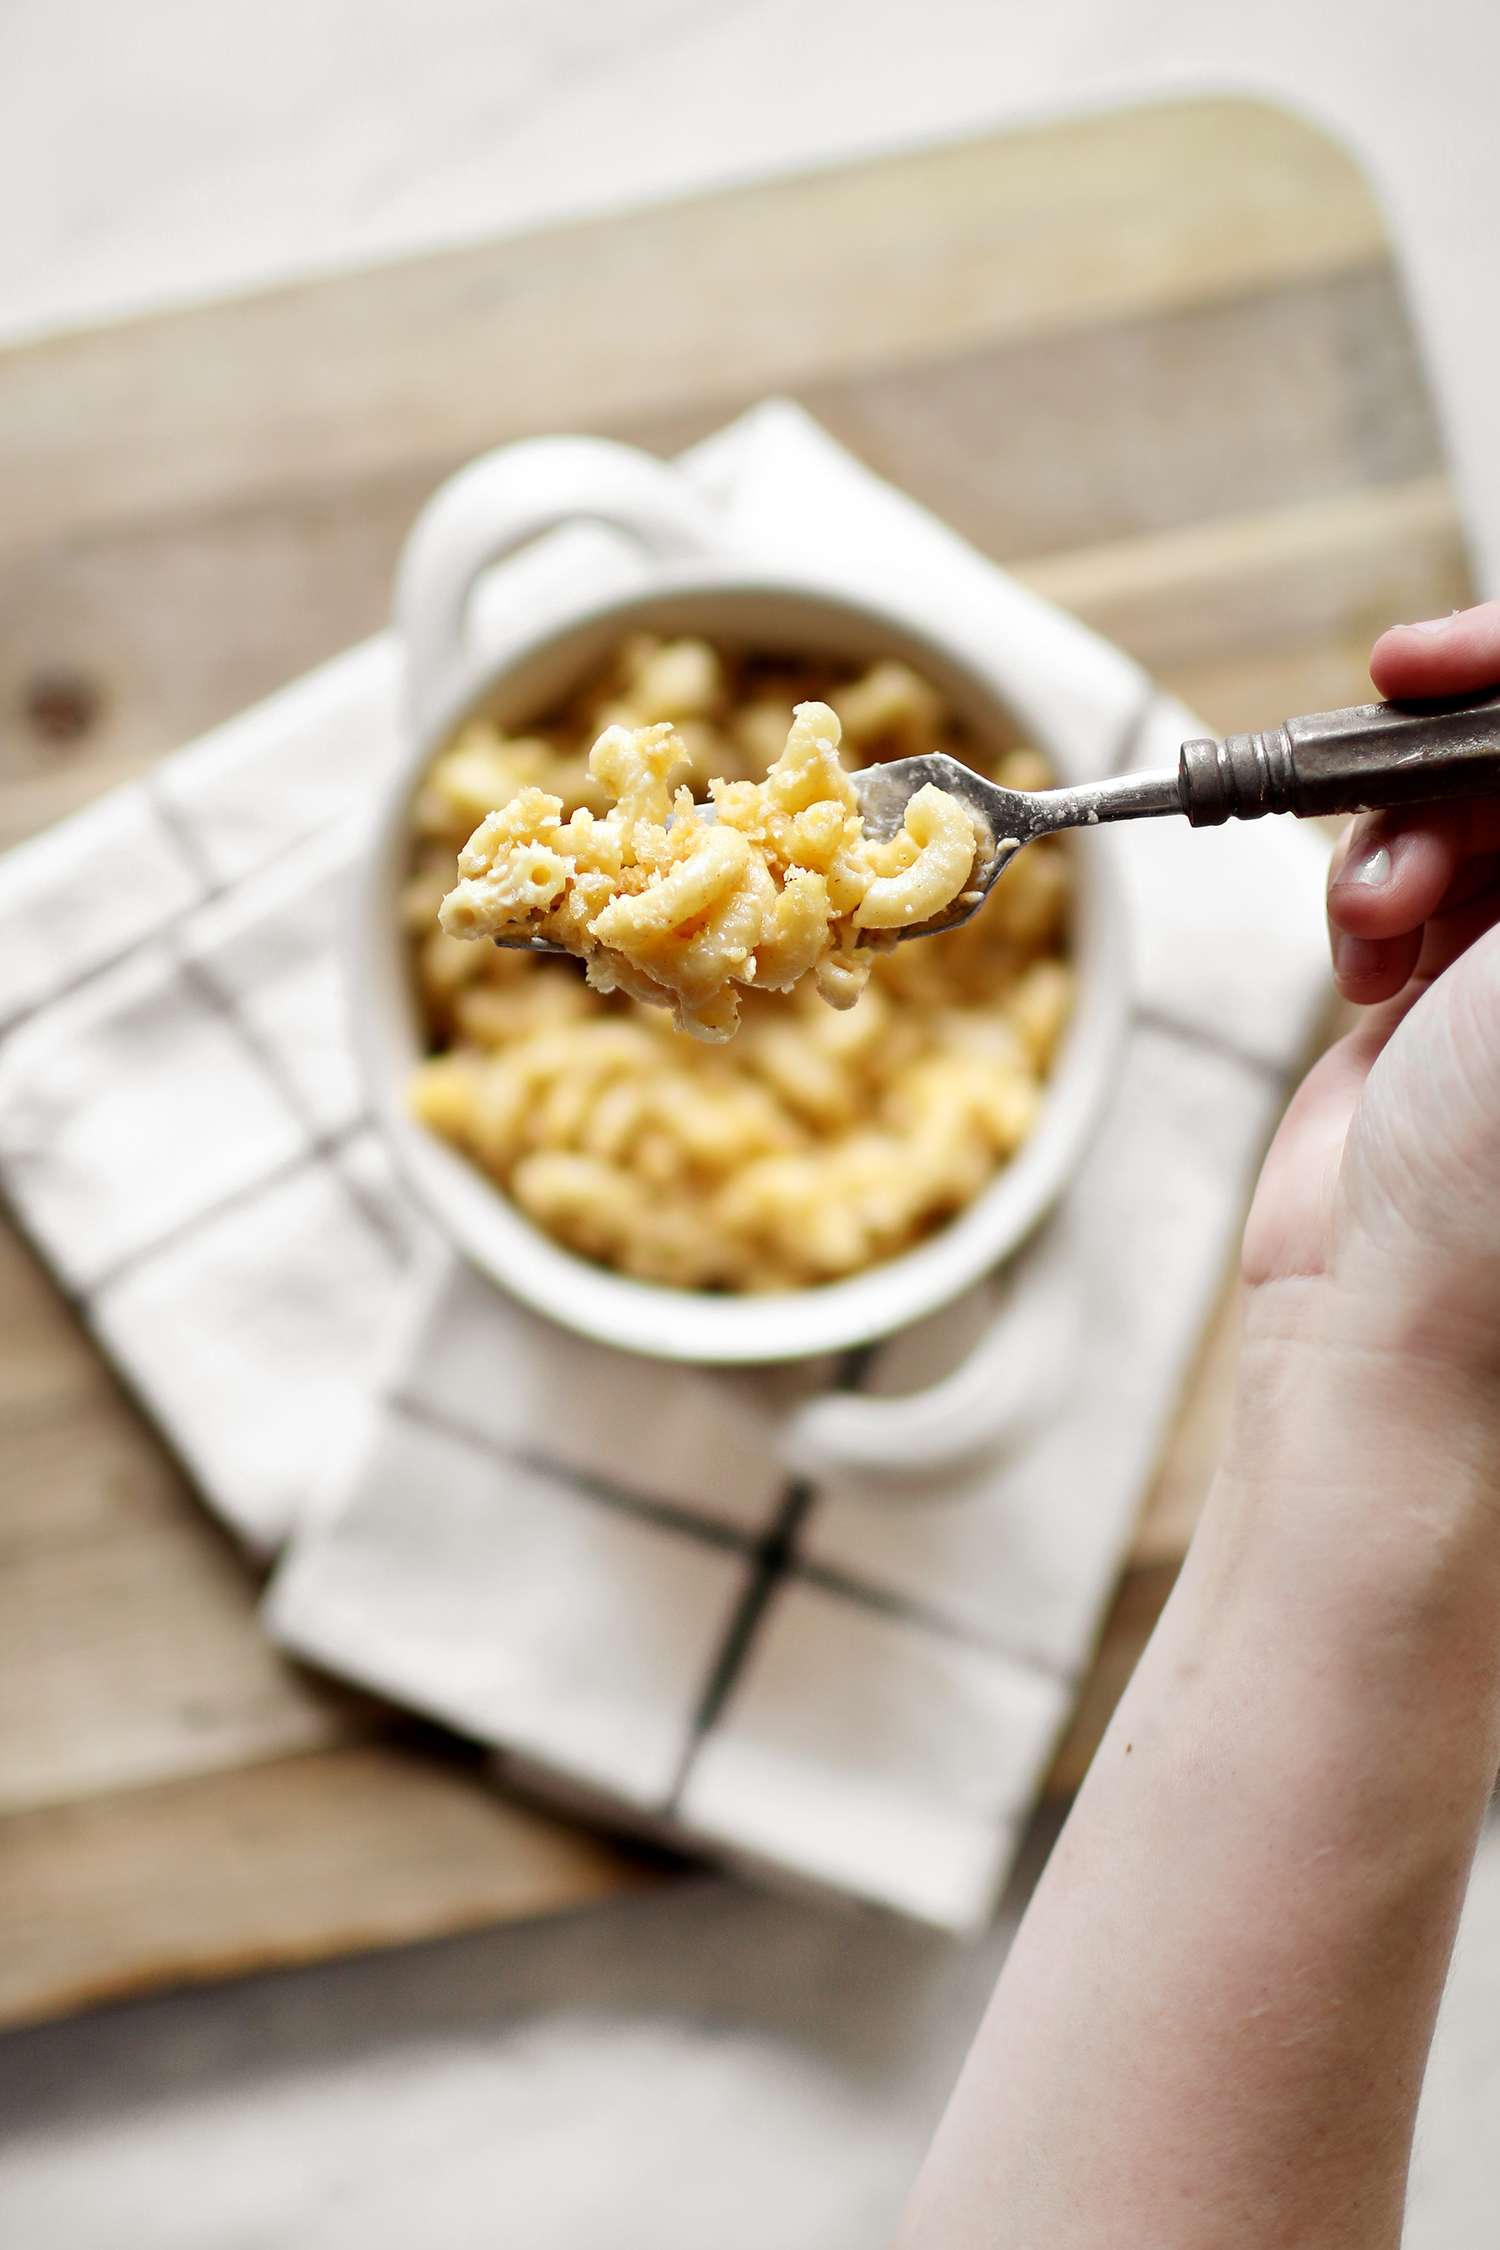 The best Chipotle Macaroni and Cheese recipe. The perfect amount of smoky flavor for the adults to enjoy and just the right amount of cheesiness for the kids to as for seconds. Catch the recipe over on KaraLayne.com!